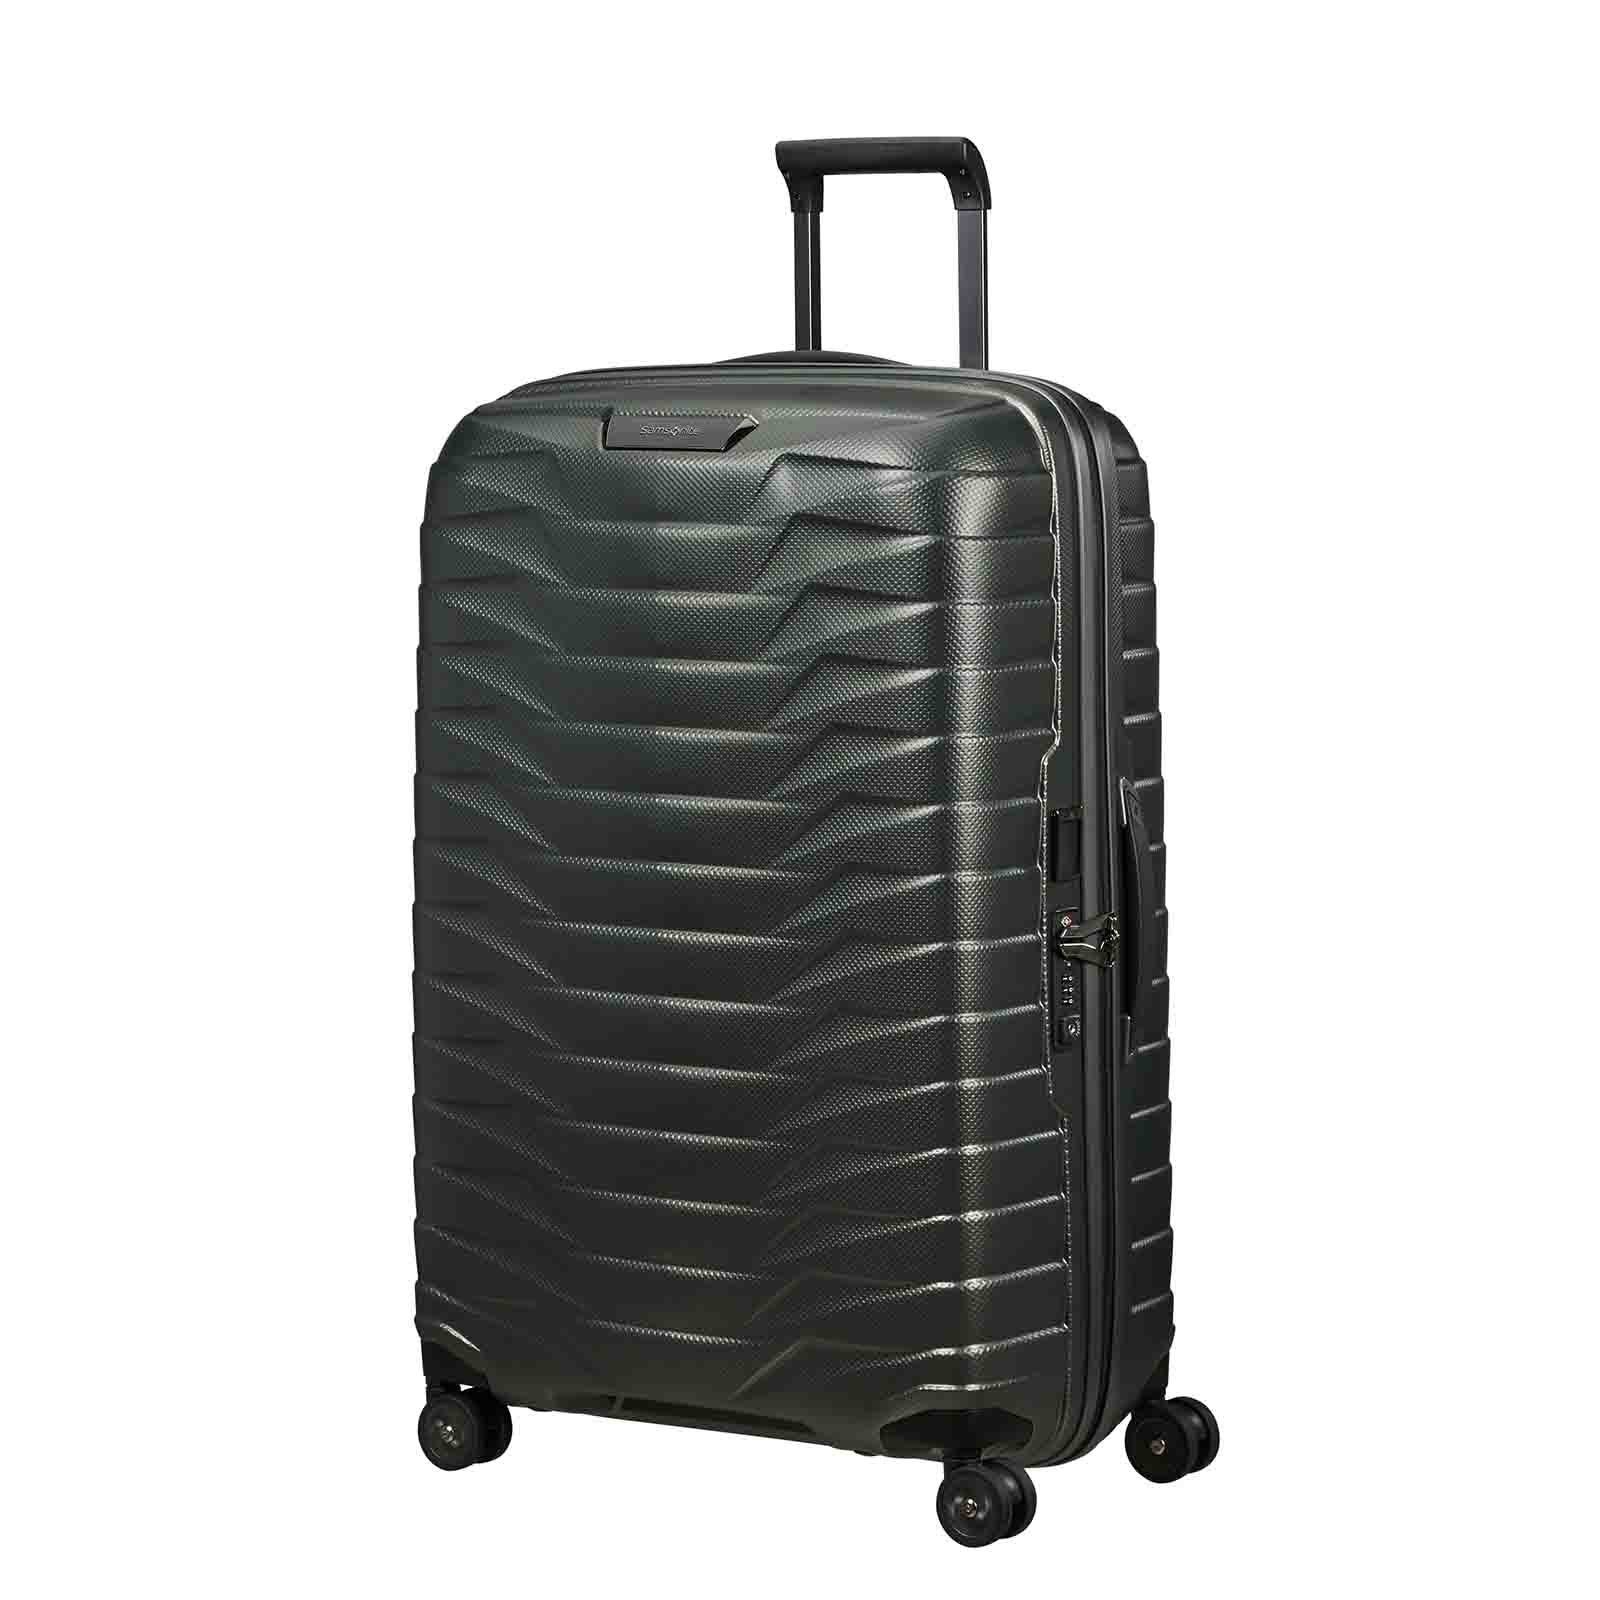 Samsonite-Proxis-75cm-Suitcase-Climbing-Ivy-Front-Angle